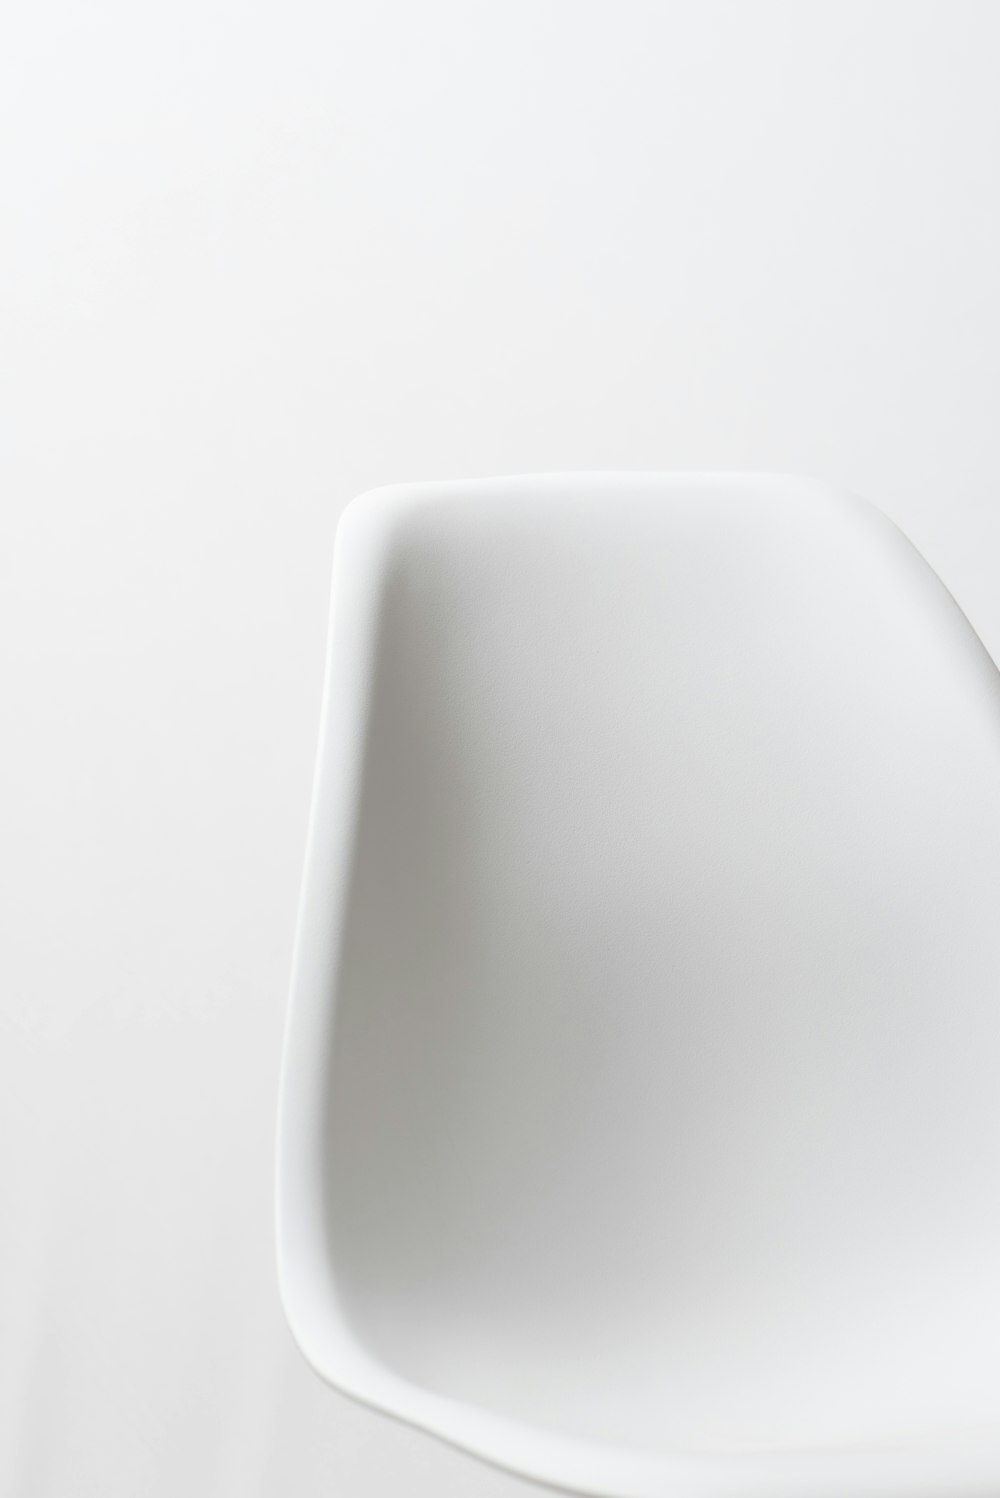 white plastic container on white surface